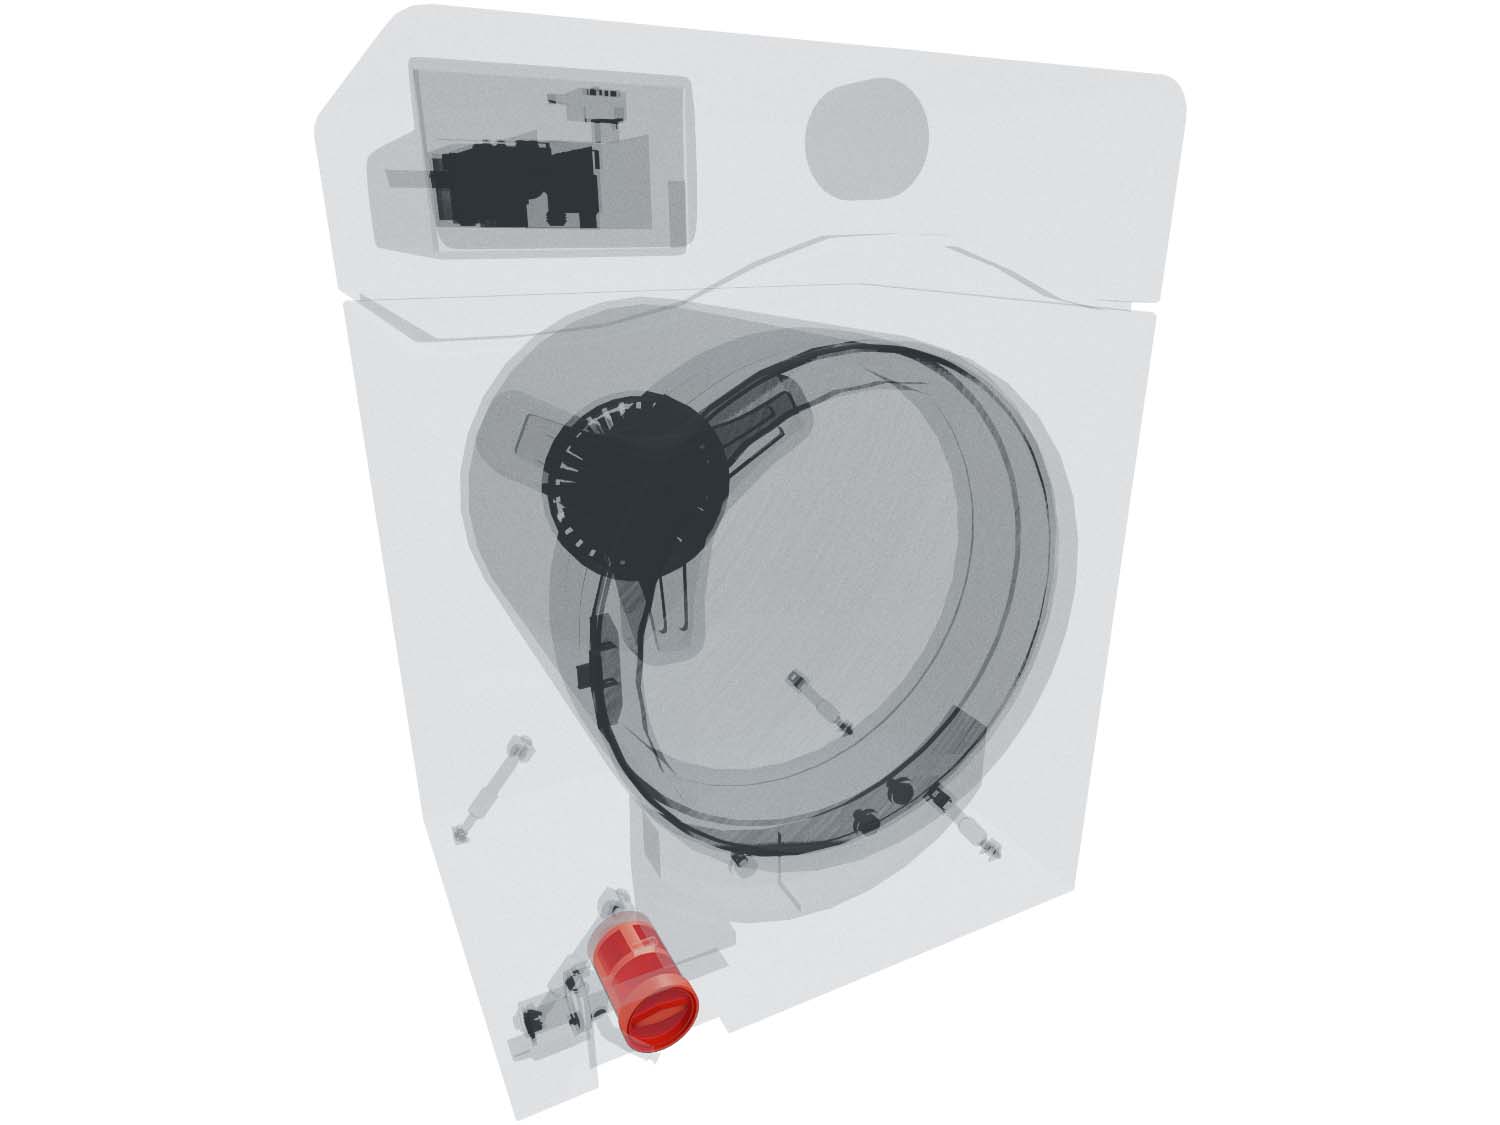 A 3D diagram showing the components of a washer and specifying the location of the drain clean out